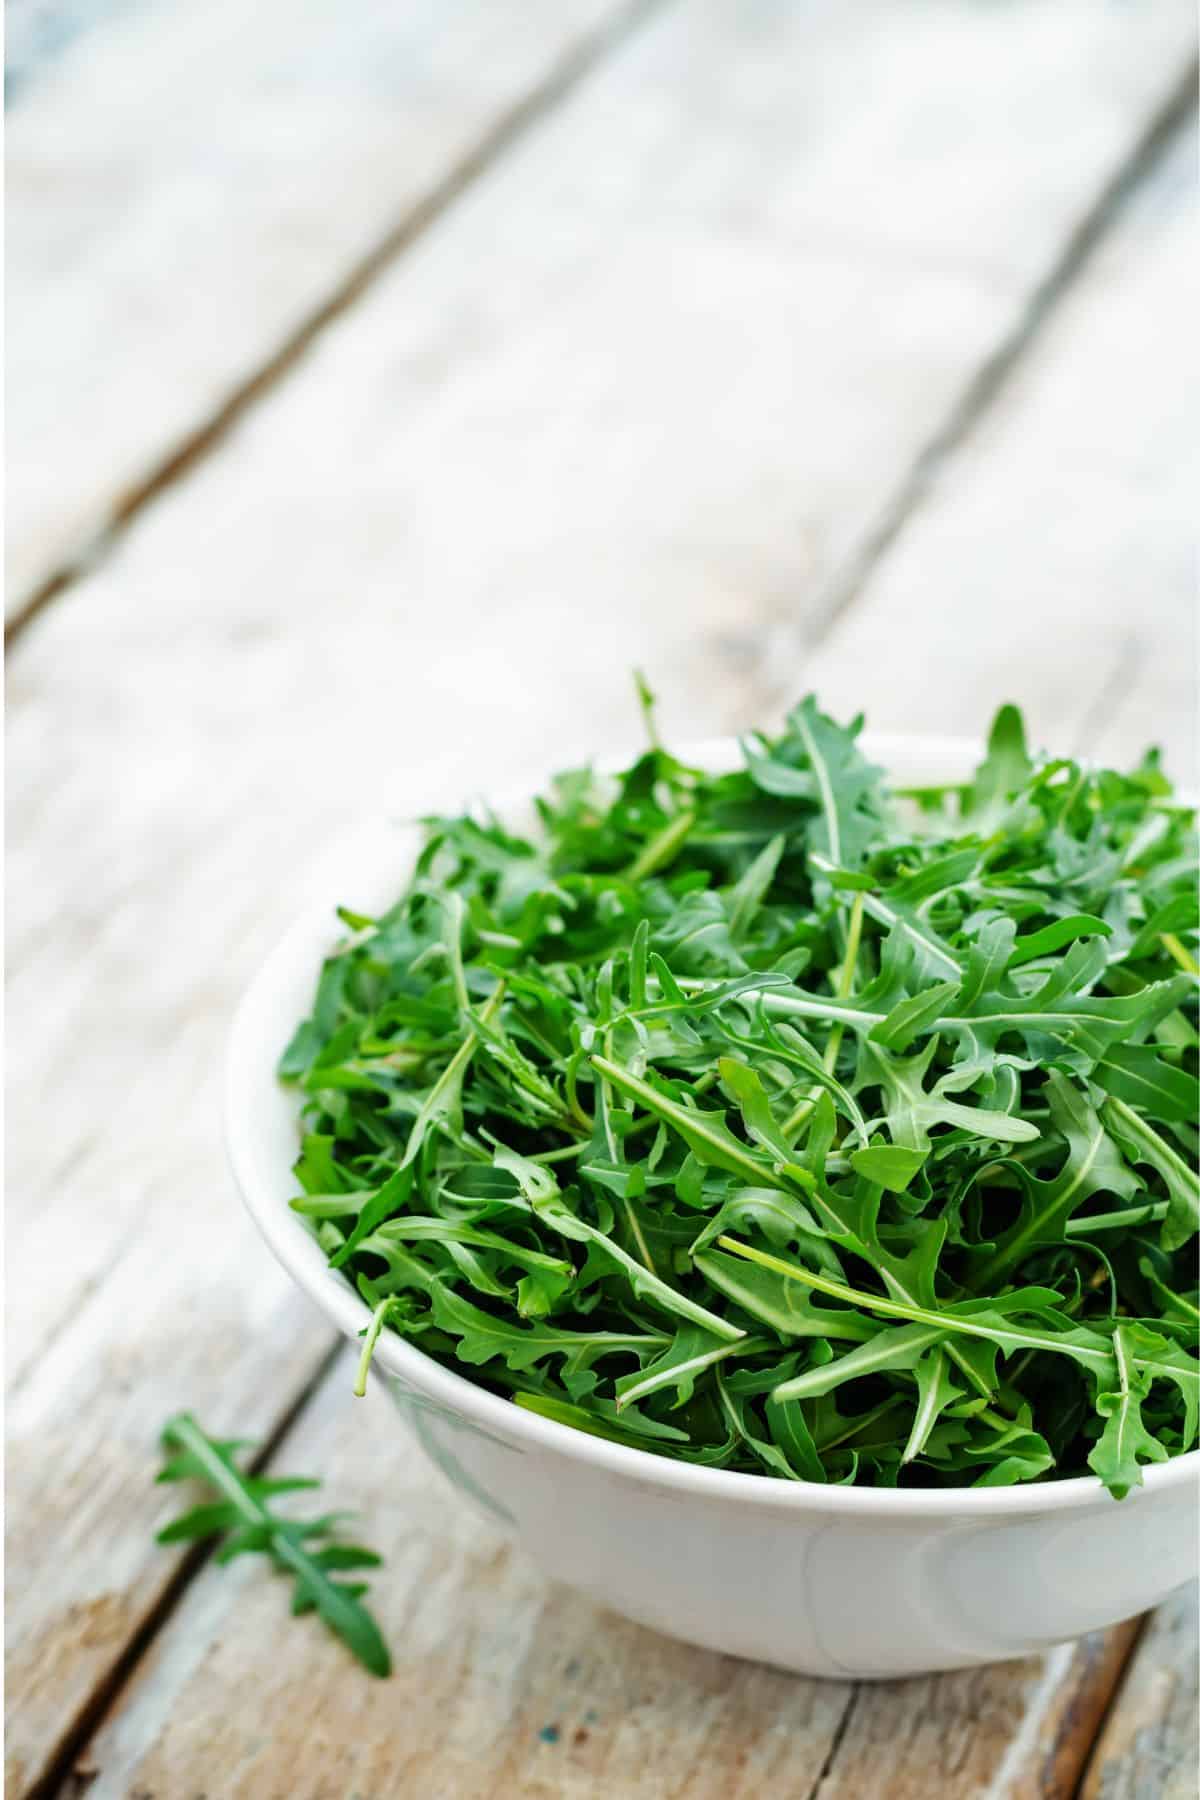 Bowl of arugula on wooden surface.